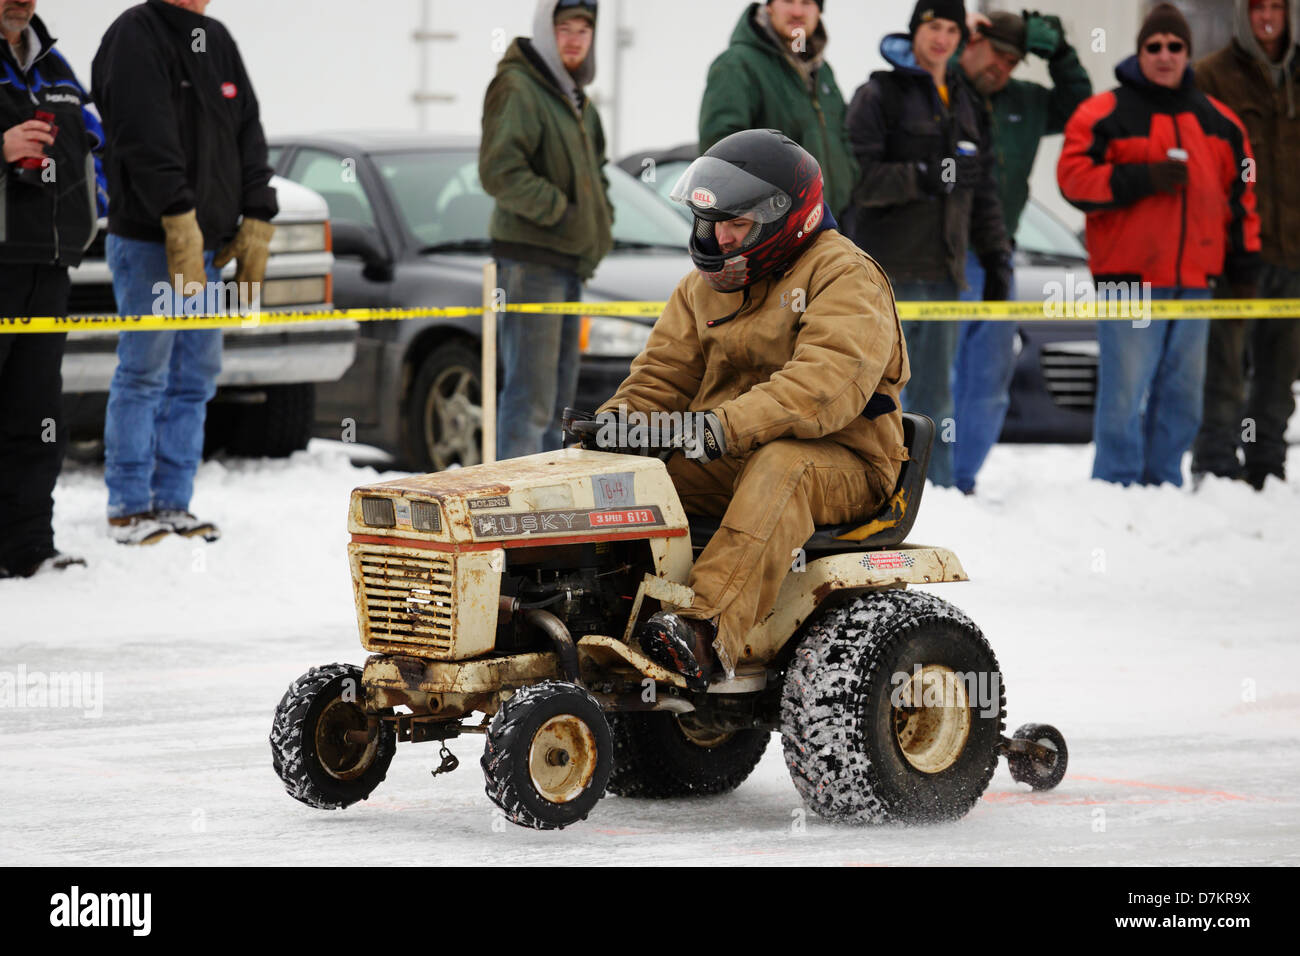 A man races a lawn mower during ice races on Knife Lake on February 9, 2013 in Mora, Minnesota. Stock Photo